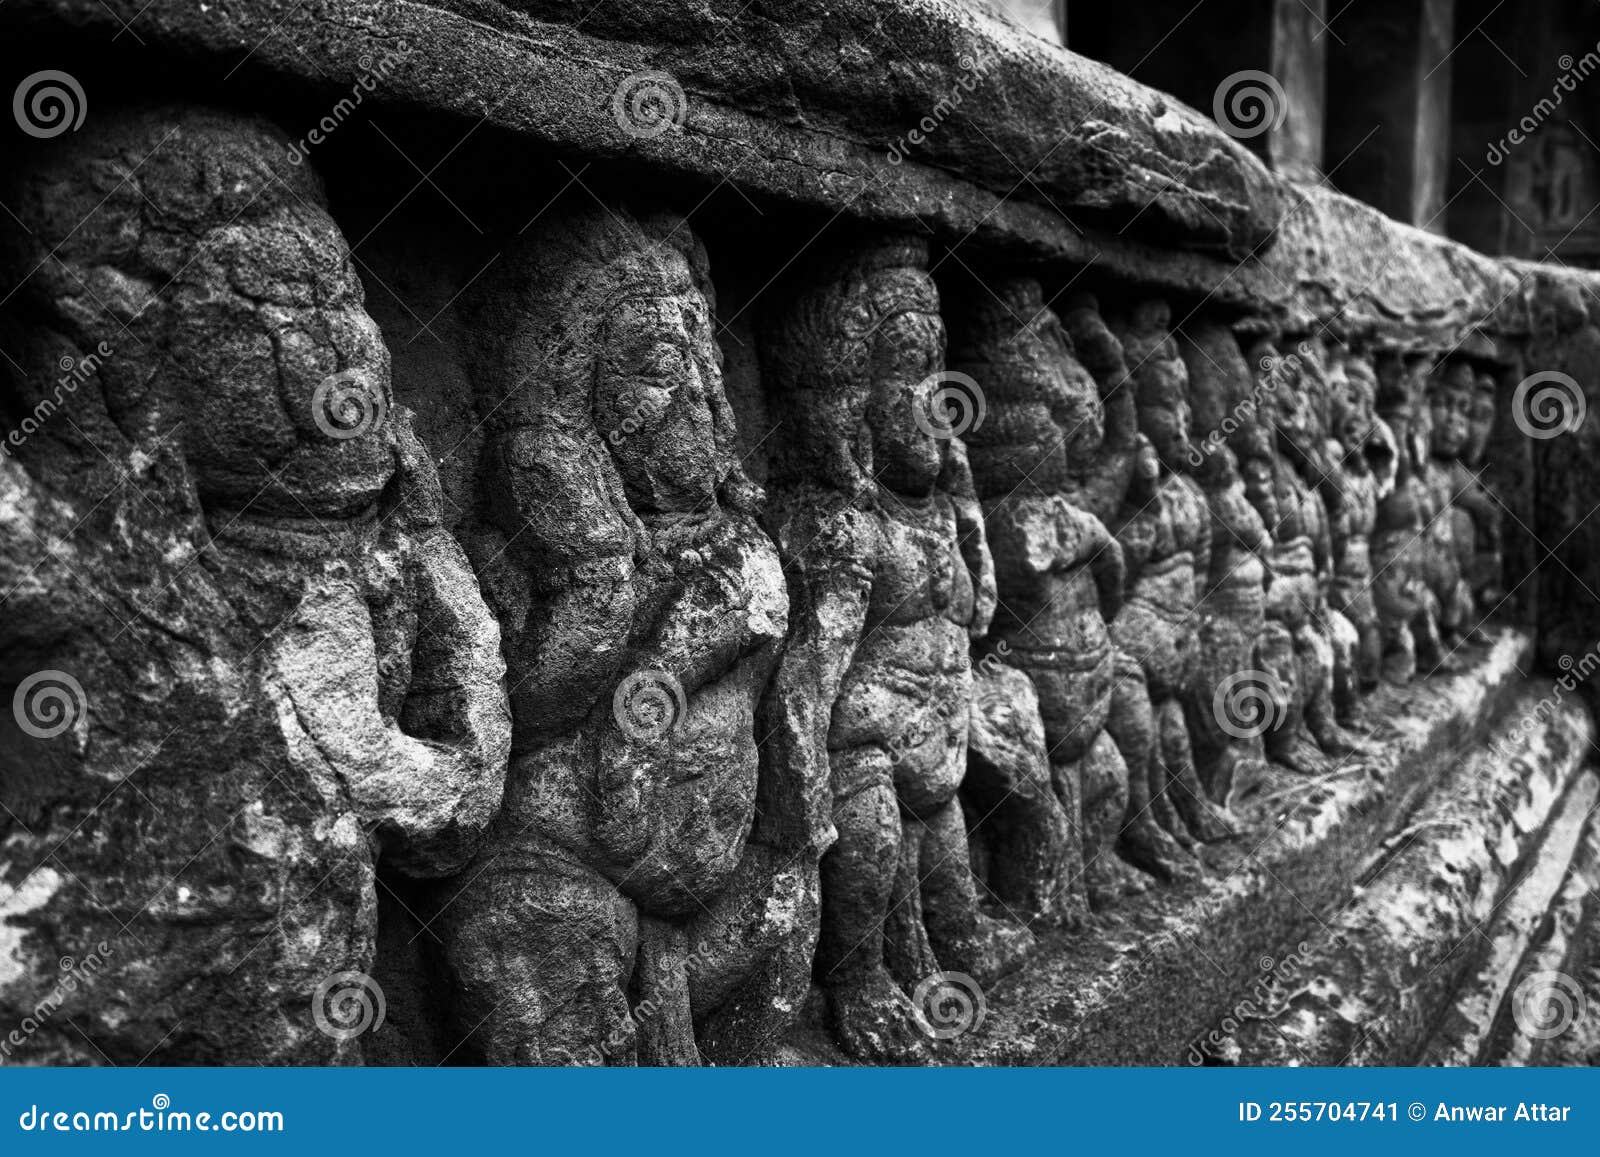 black and white shot of dancing ganas sculptures with selective focus at badami